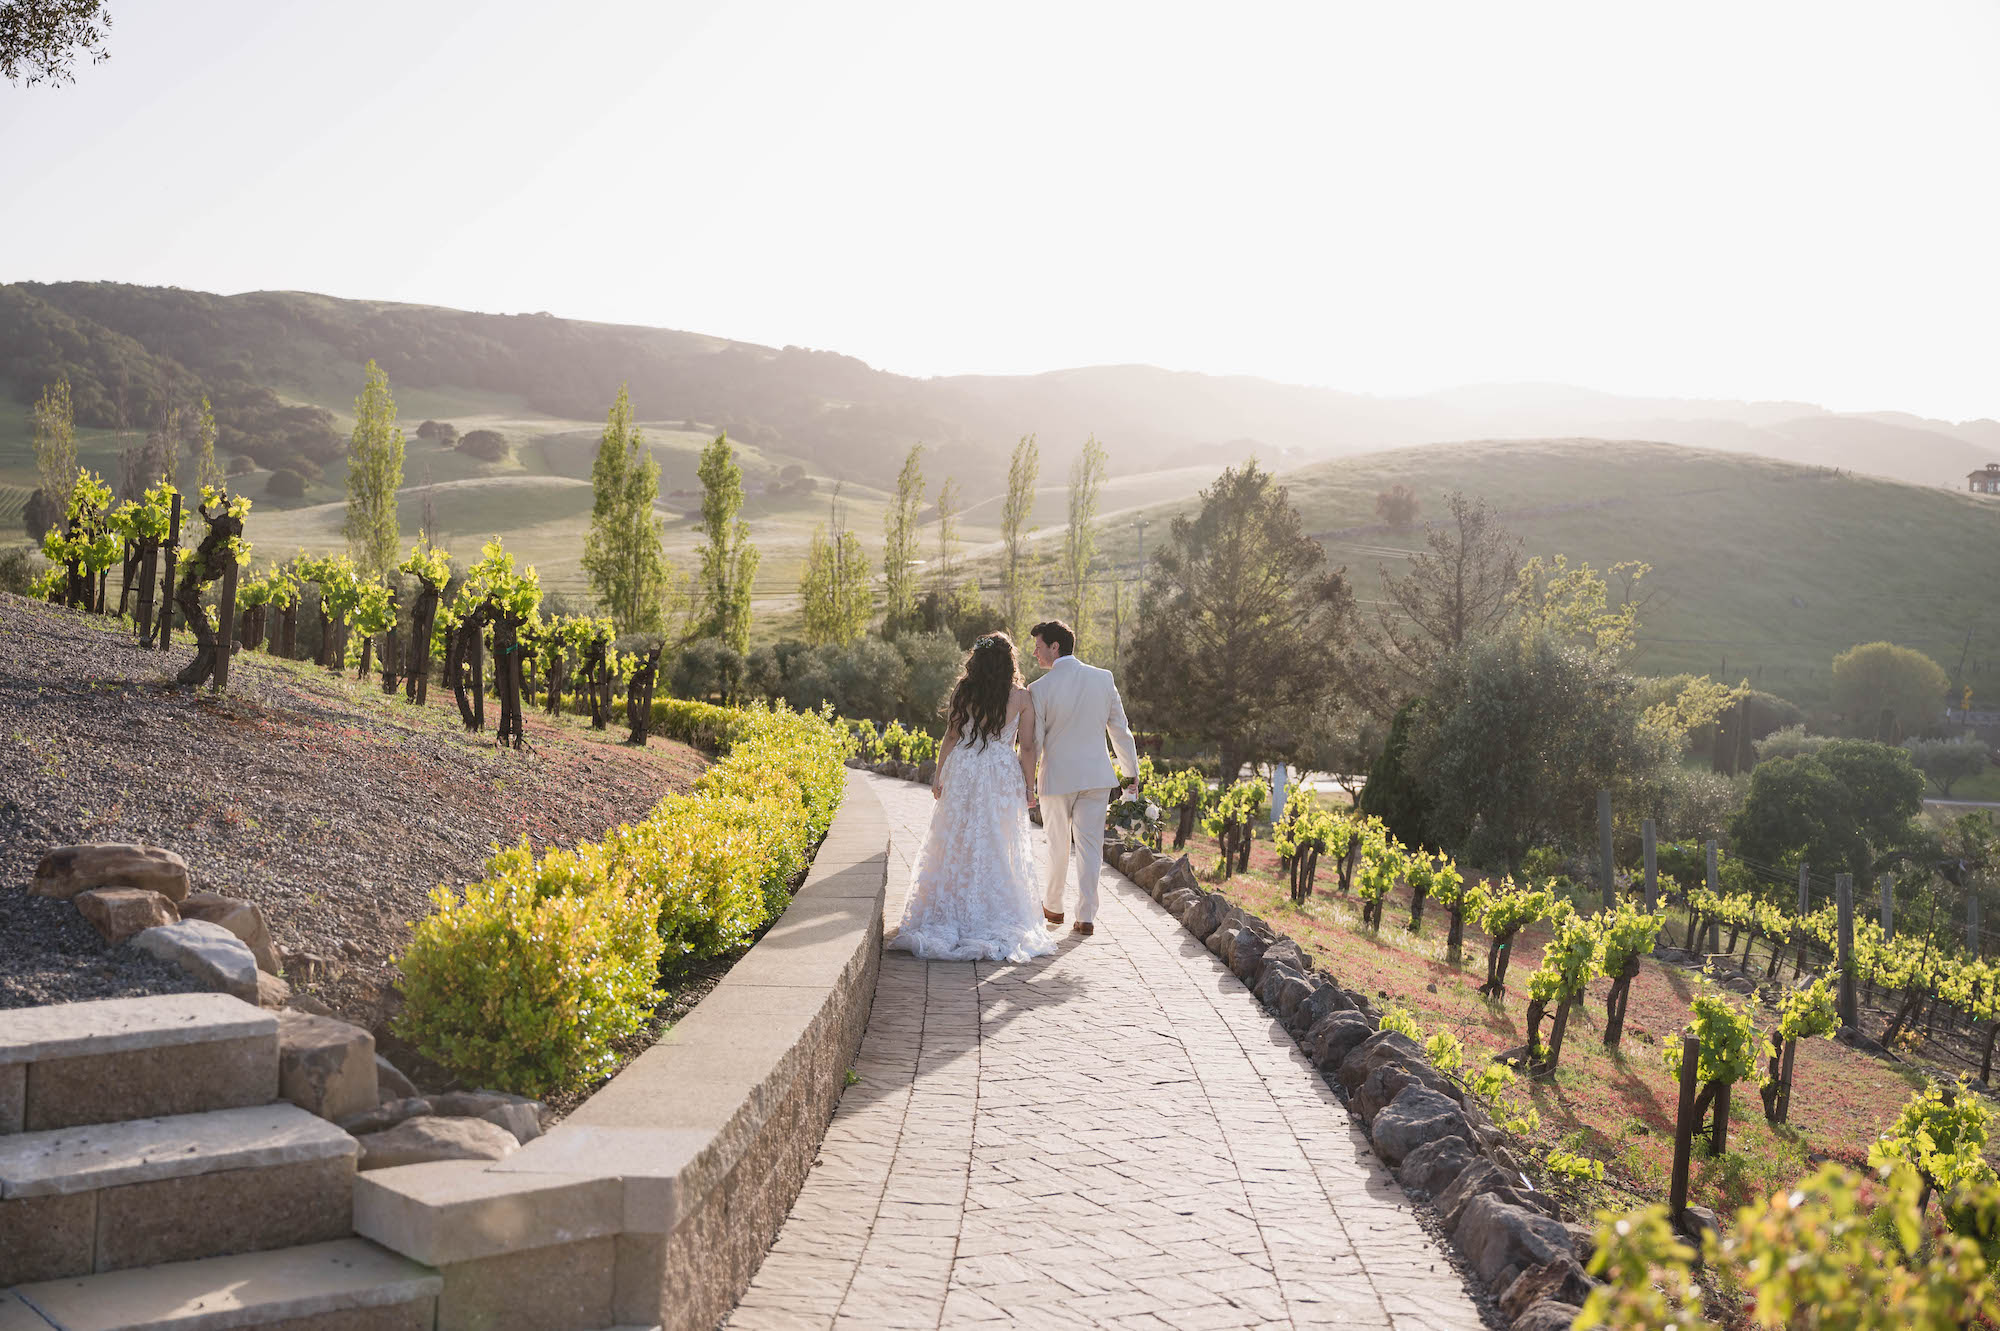 First Look for bride and groom for this Soft Romantic + Minimalistic Wedding at Viansa Winery in Sonoma Jen Vazquez Photography